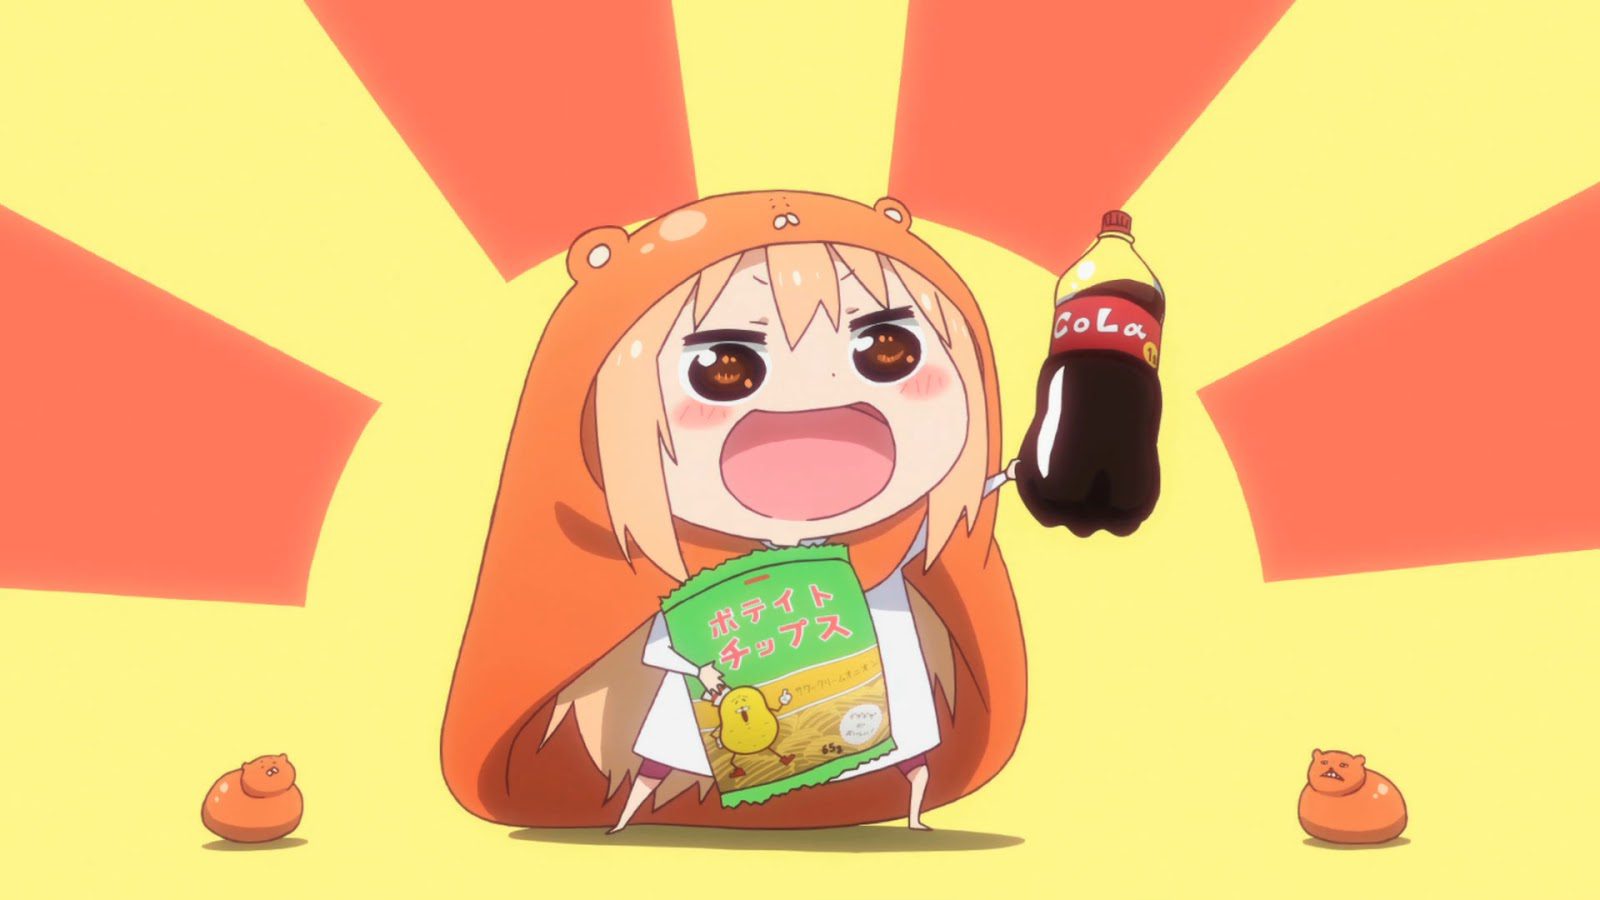 10 of the Best Chibi Anime Series You Should Check Out - Himouto! Umaru-chan poster